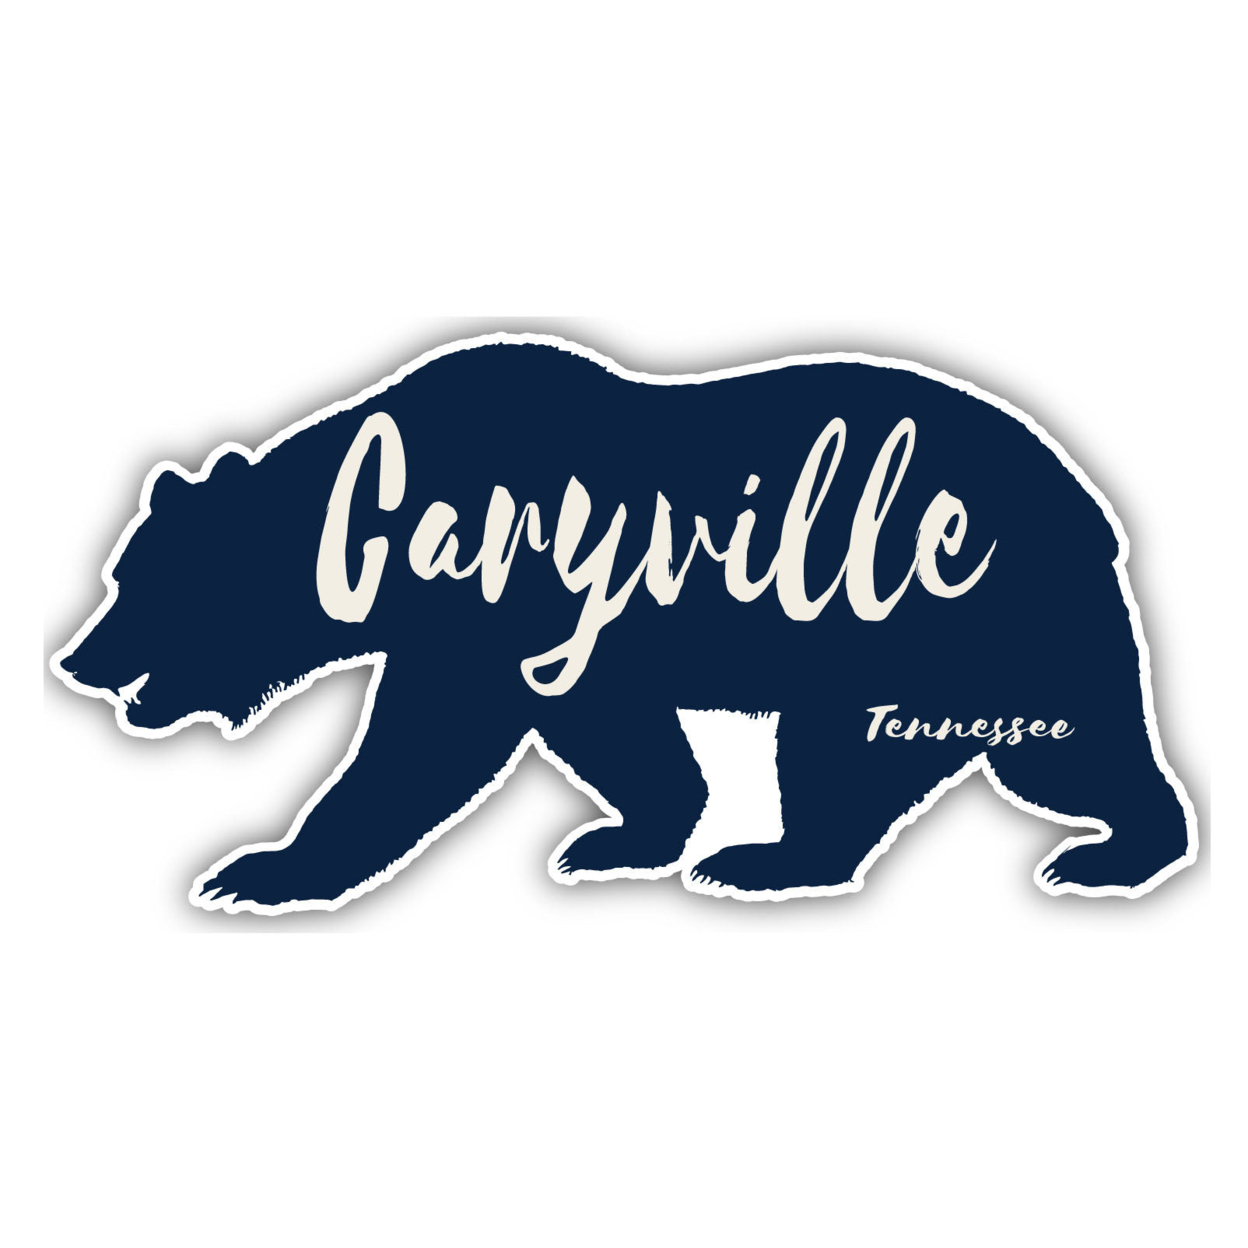 Caryville Tennessee Souvenir Decorative Stickers (Choose Theme And Size) - Single Unit, 4-Inch, Camp Life